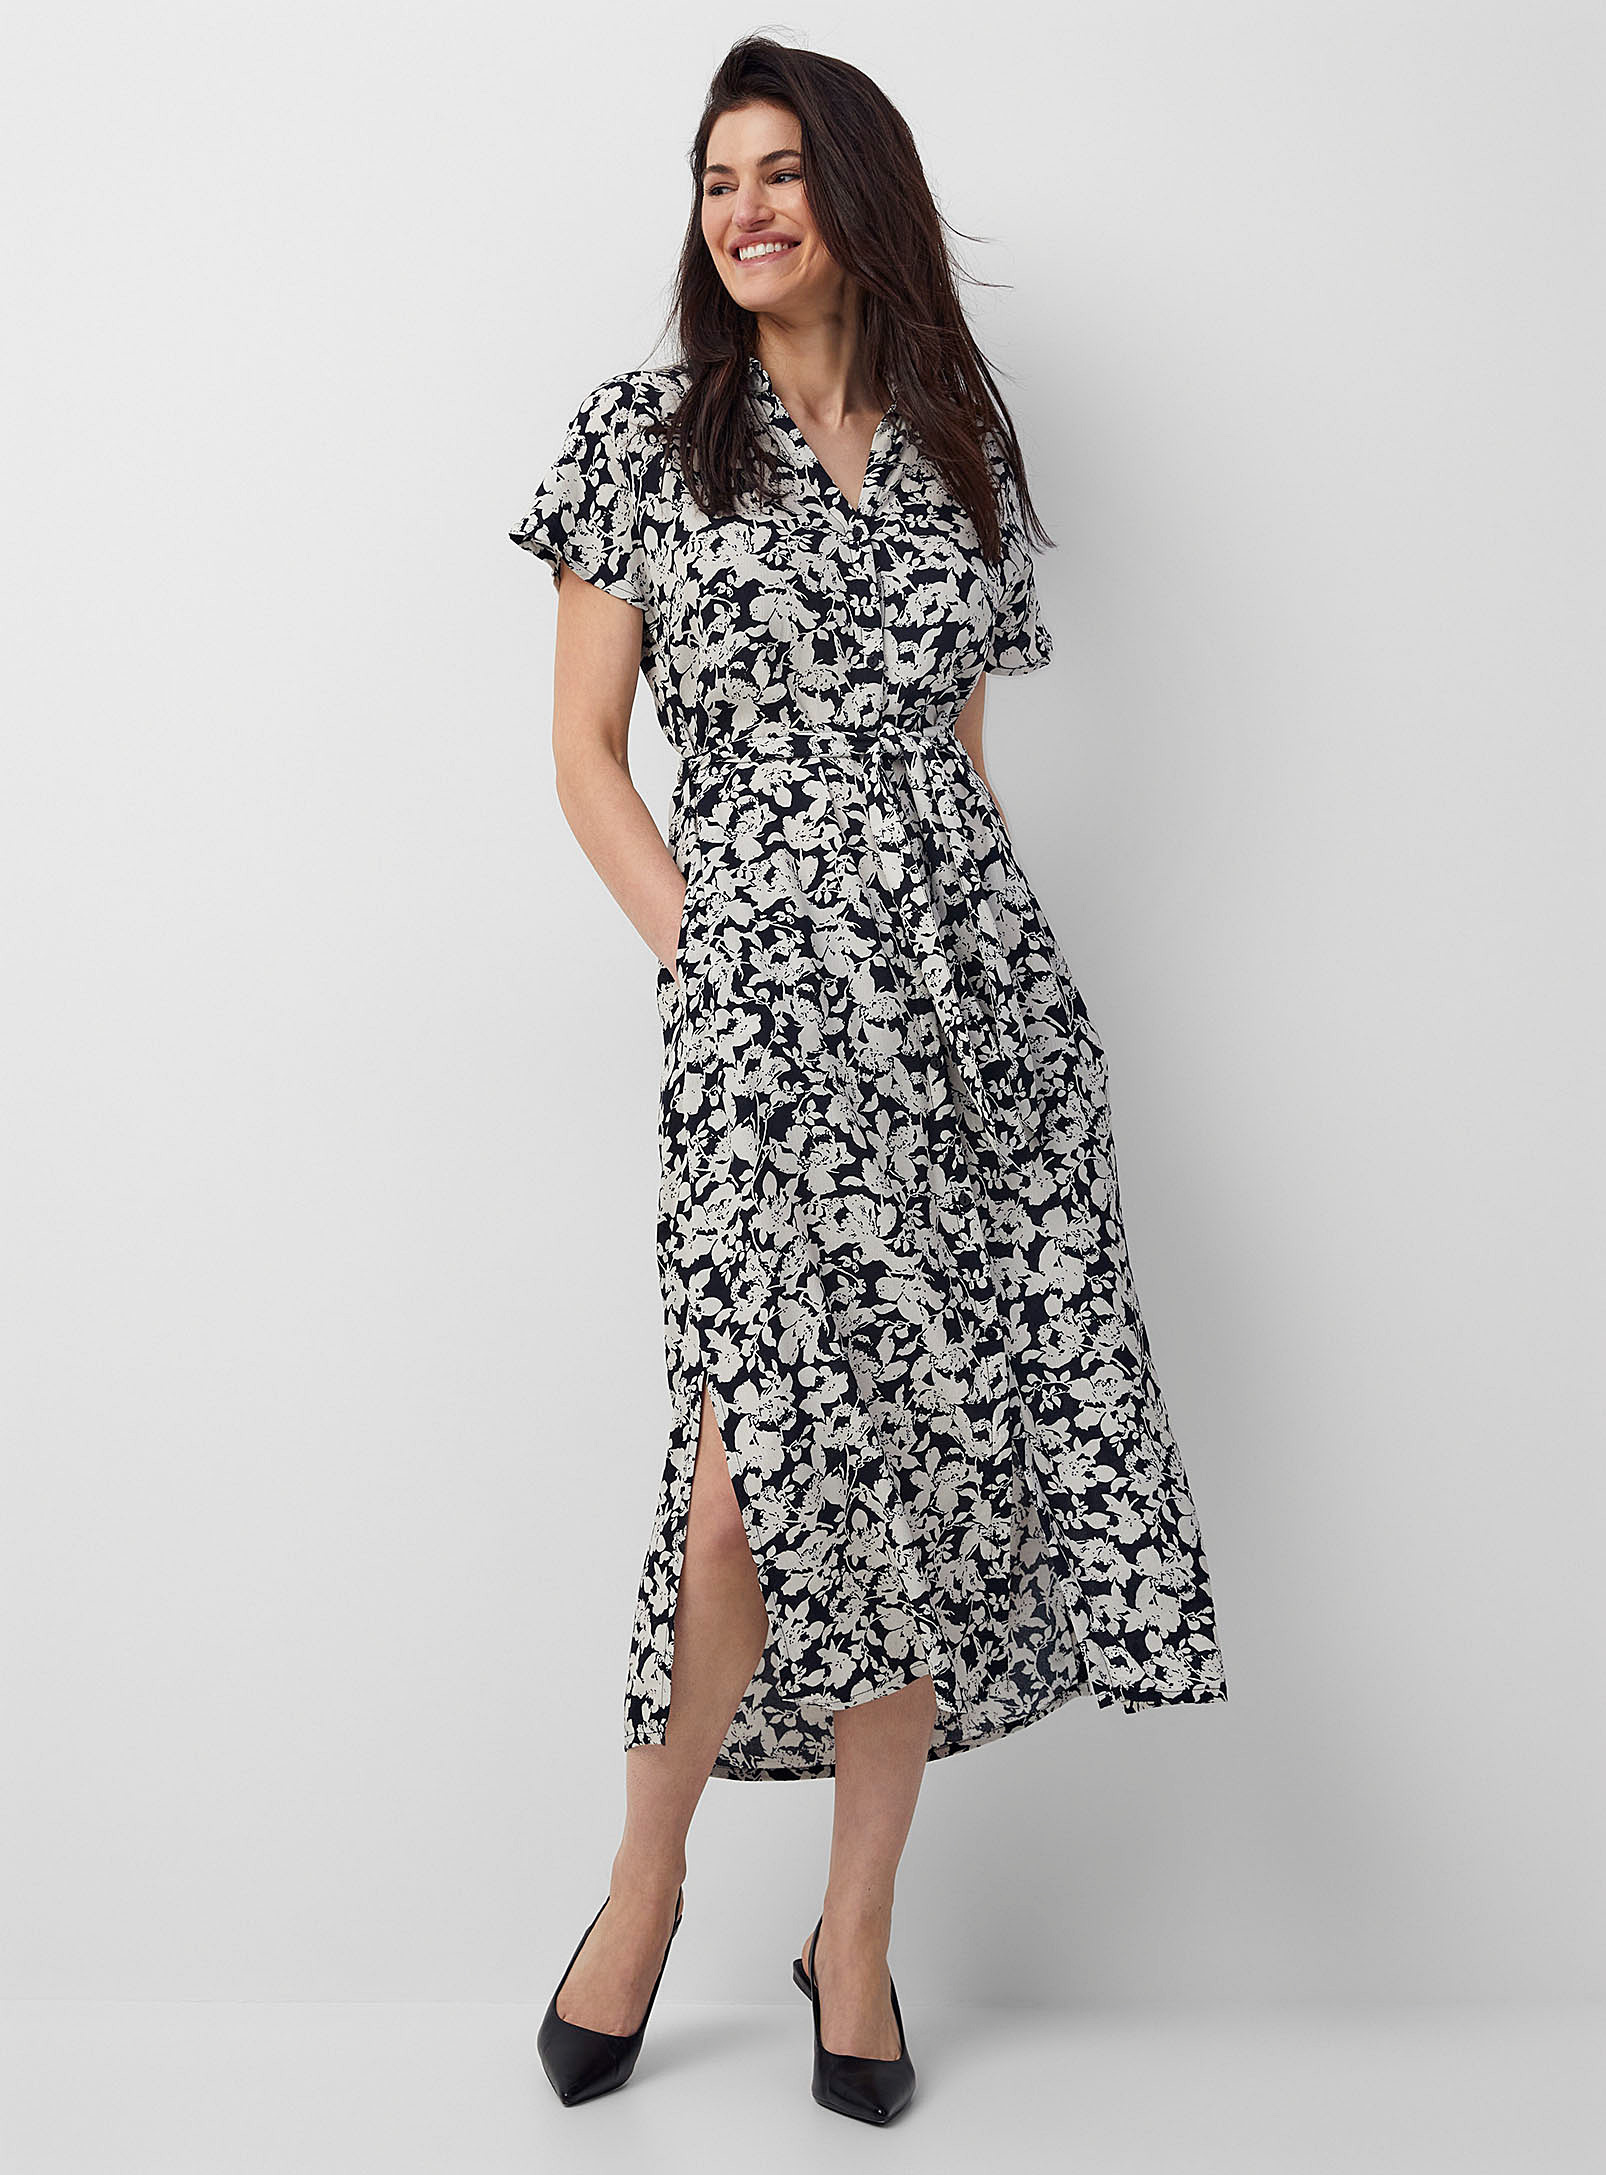 Contemporaine Contrasting Garden Belted Dress In Black And White